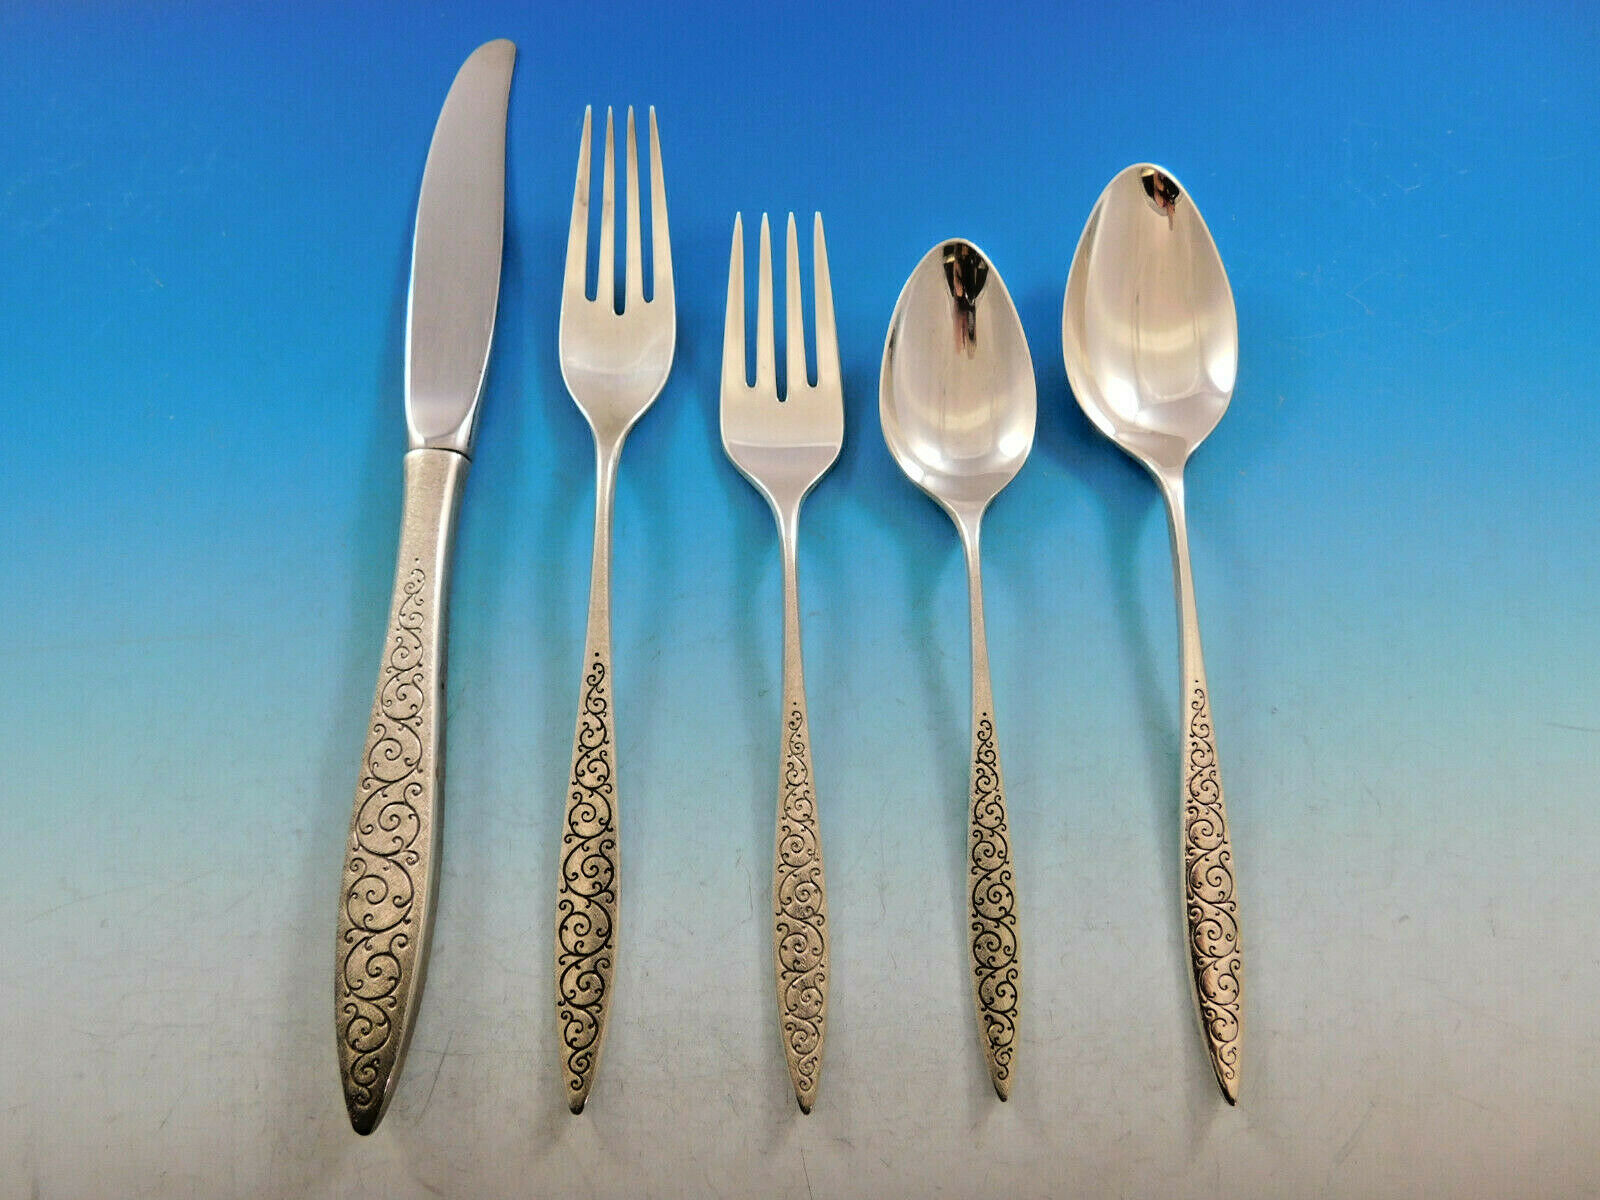 Primary image for Spanish Lace by Wallace Sterling Silver Flatware Service for 8 Set 46 Pieces